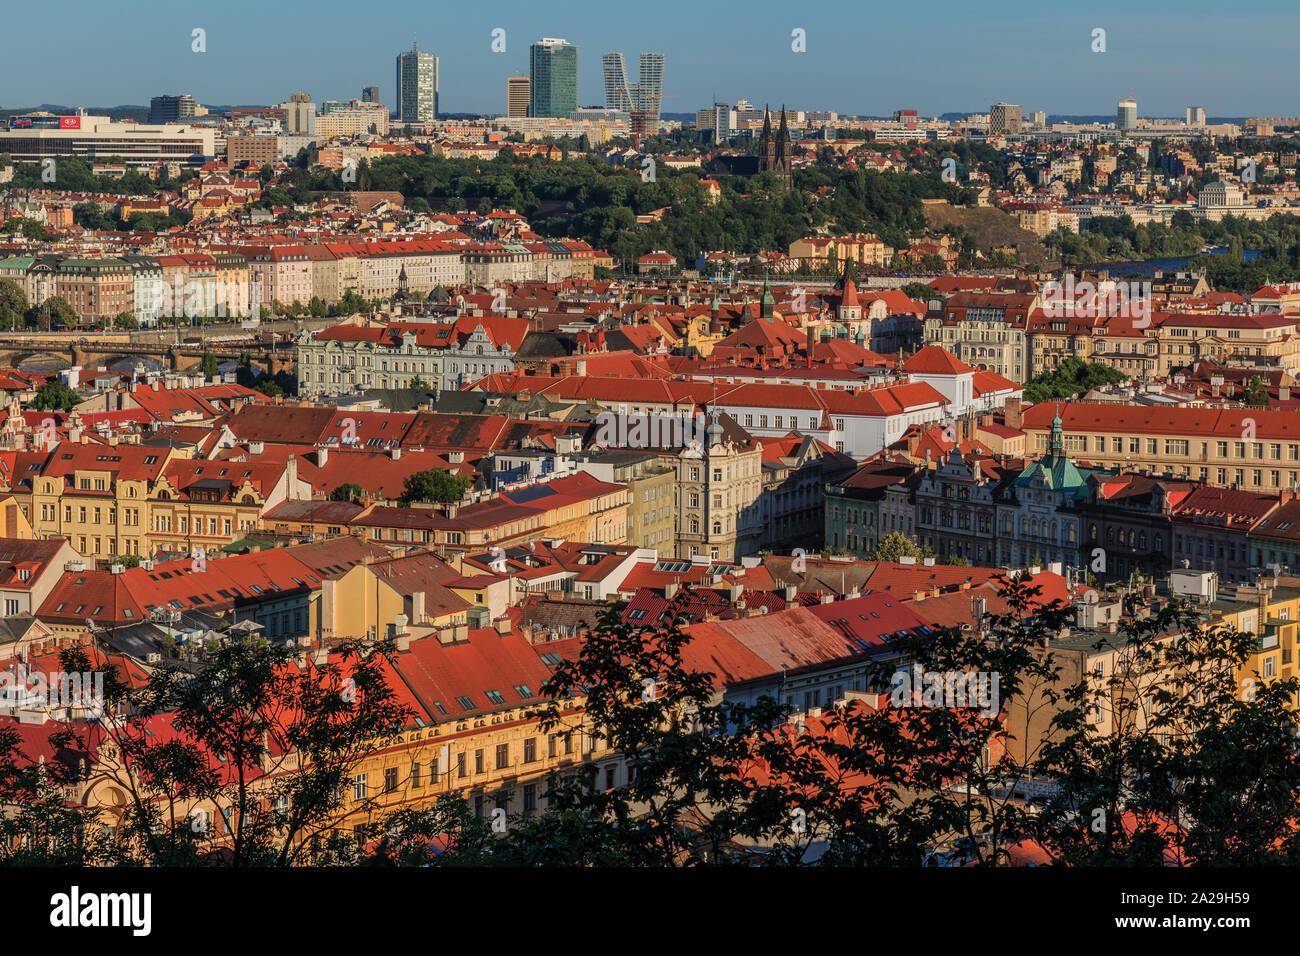 Panoramic view over the rooftops and historic buildings of the Prague Mala Strana district and the river Vltava on a sunny day with blue sky Stock Photo